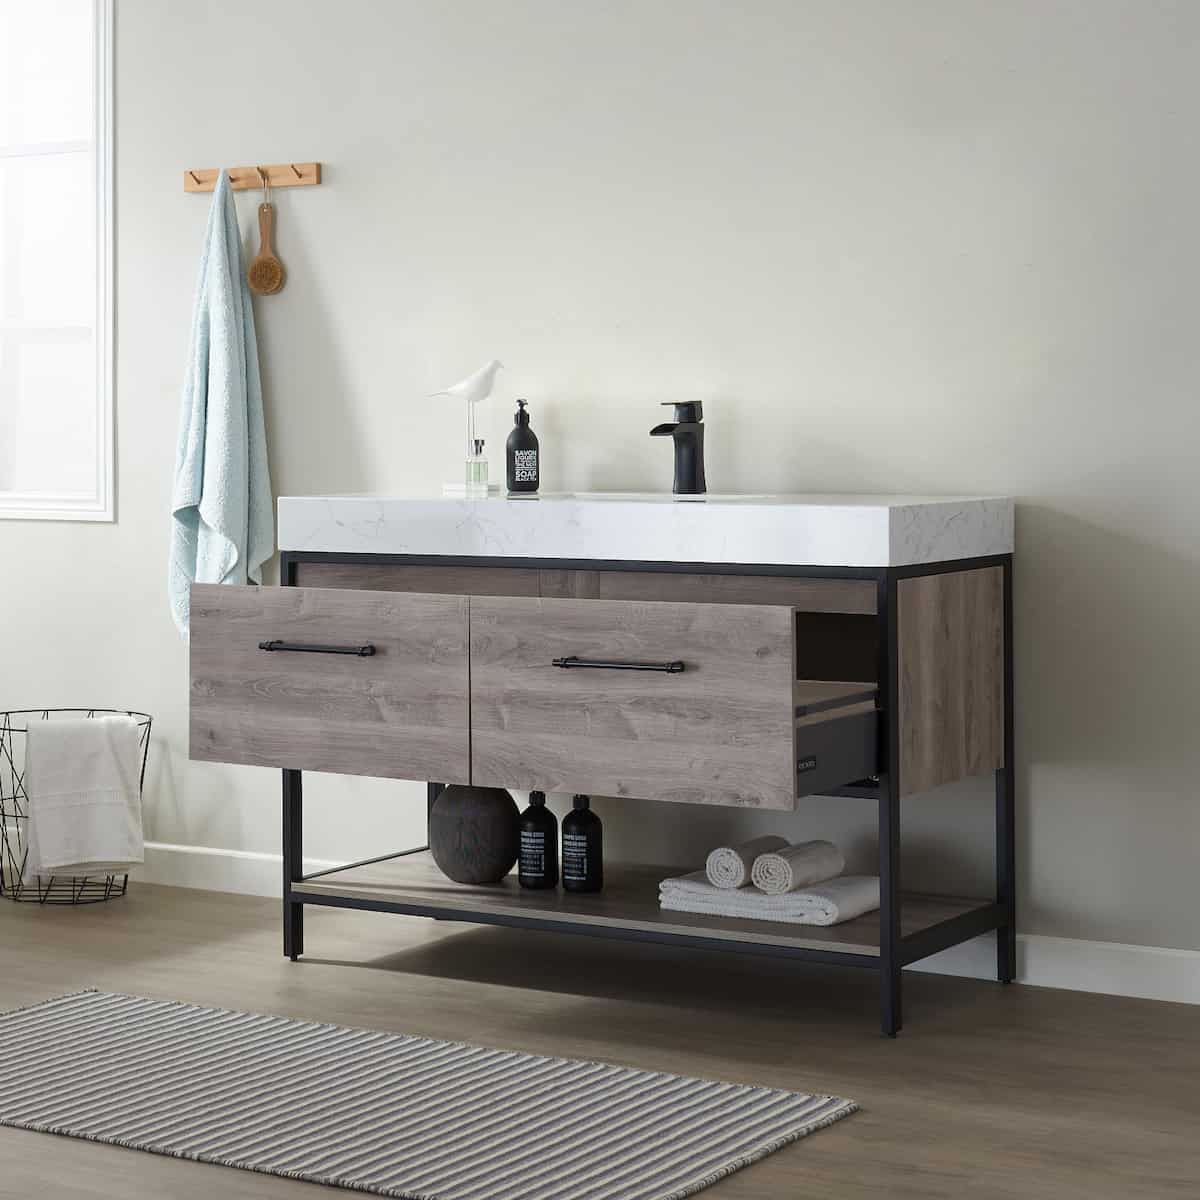 Vinnova Palma 48 Inch Freestanding Single Vanity In Mexican Oak with White Composite Grain Stone Countertop Without Mirror Drawers 701248-MXO-GW-NM